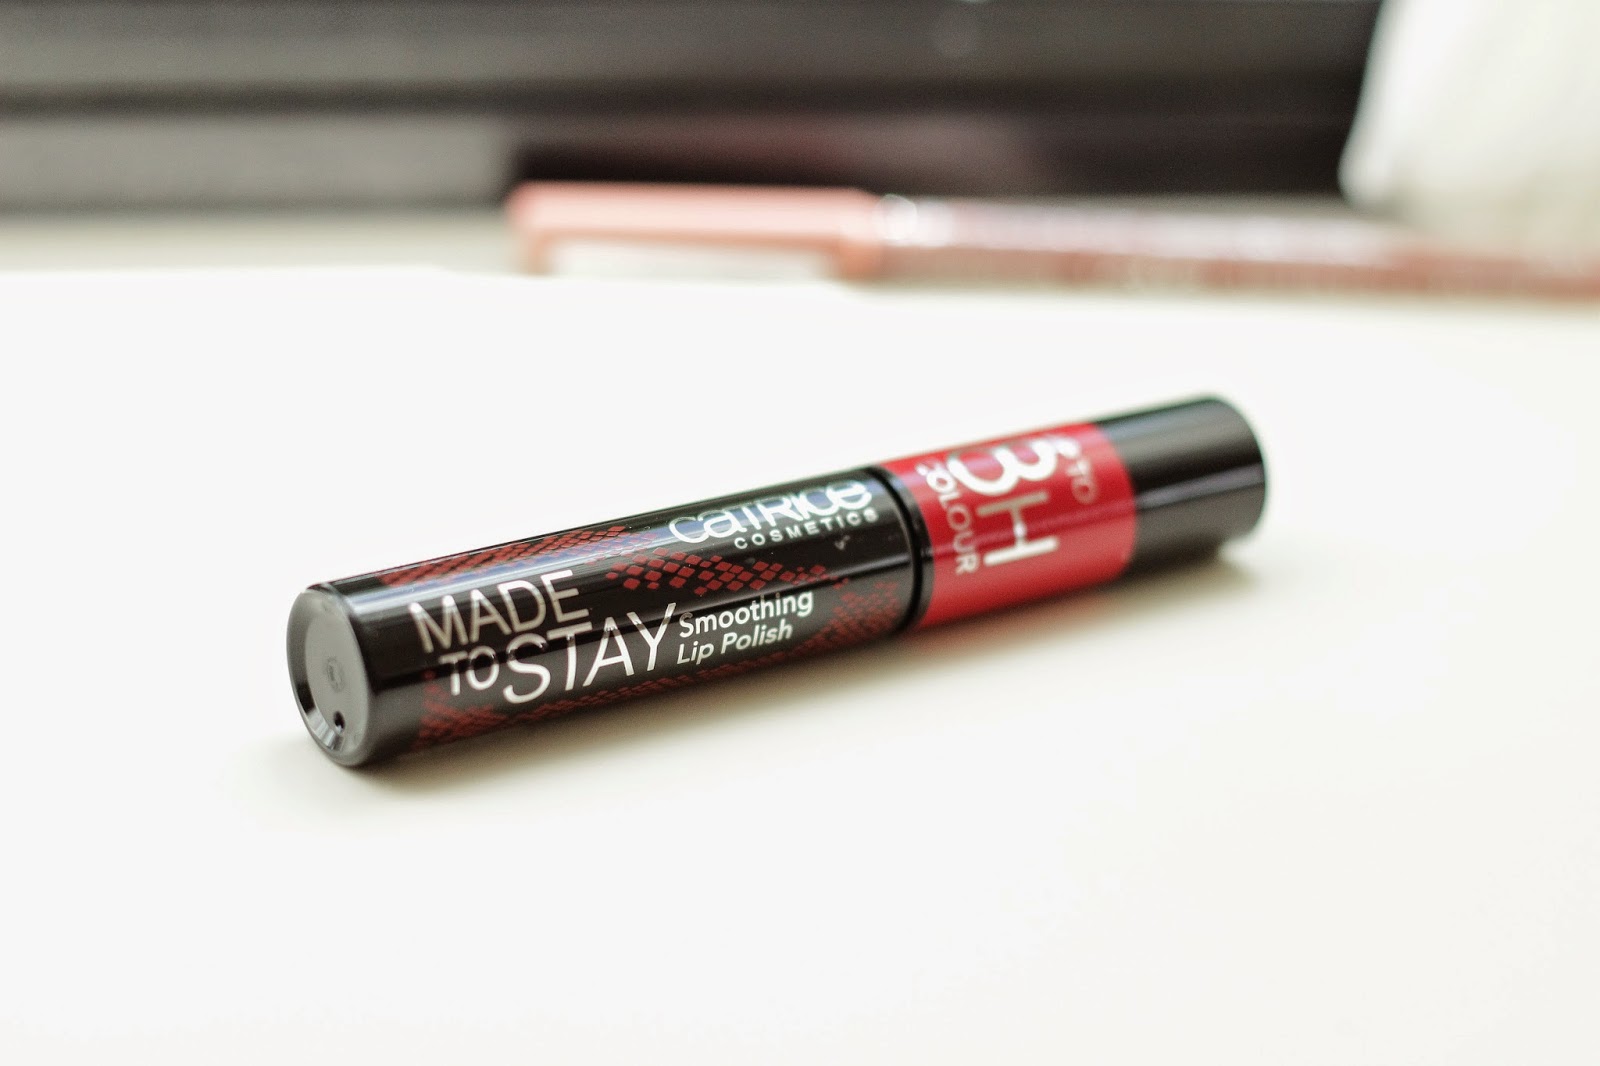 review catrice made to stay smoothing lip polish "red-volution"